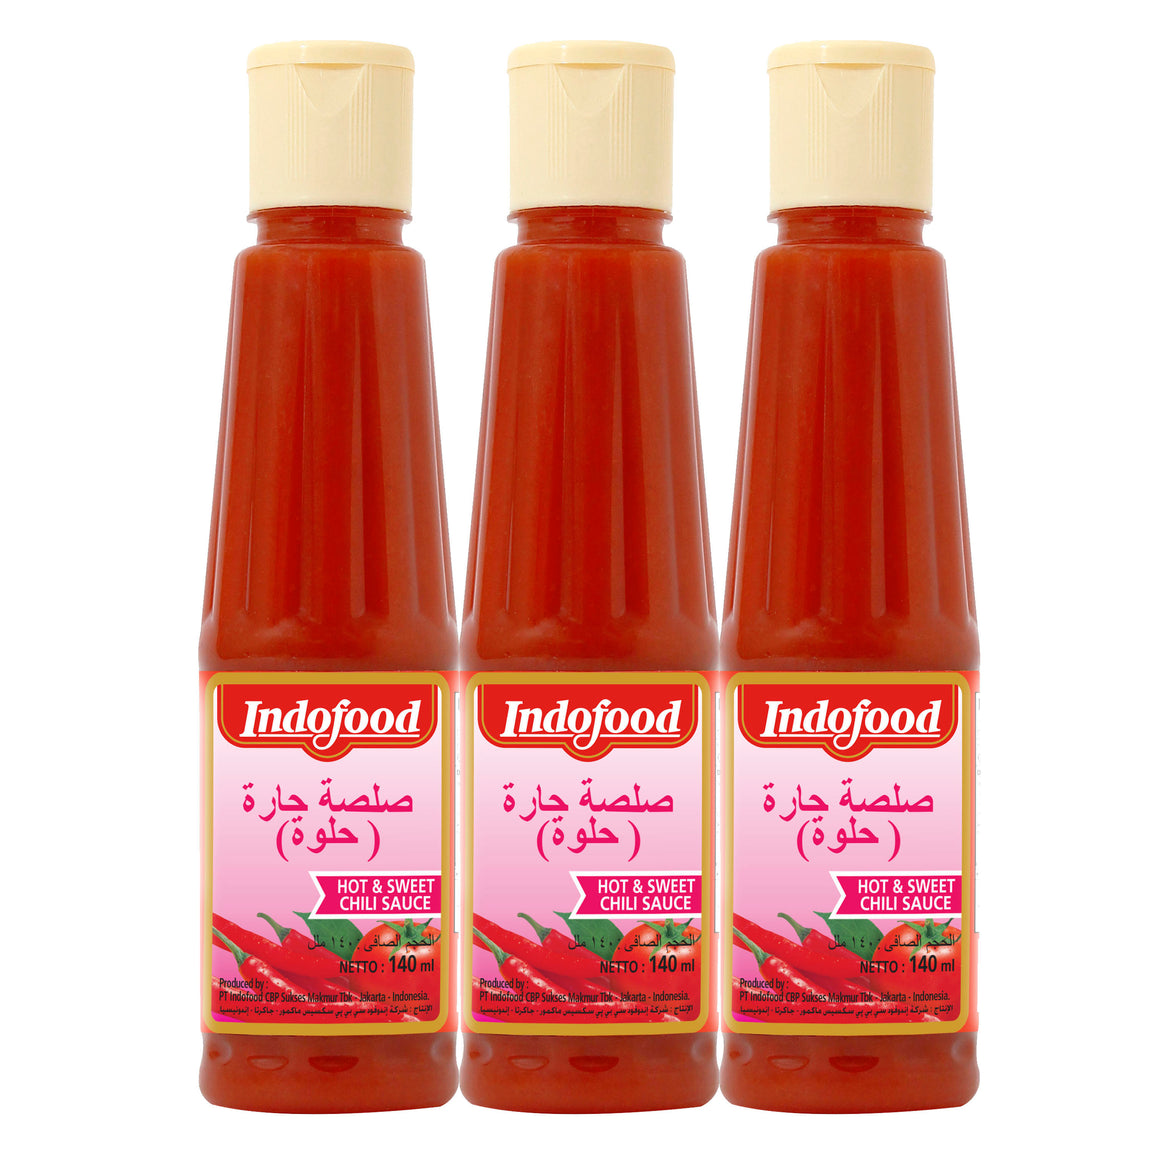 Indofood Hot & Sweet Chili Sauce 140ml (Pack of 3)